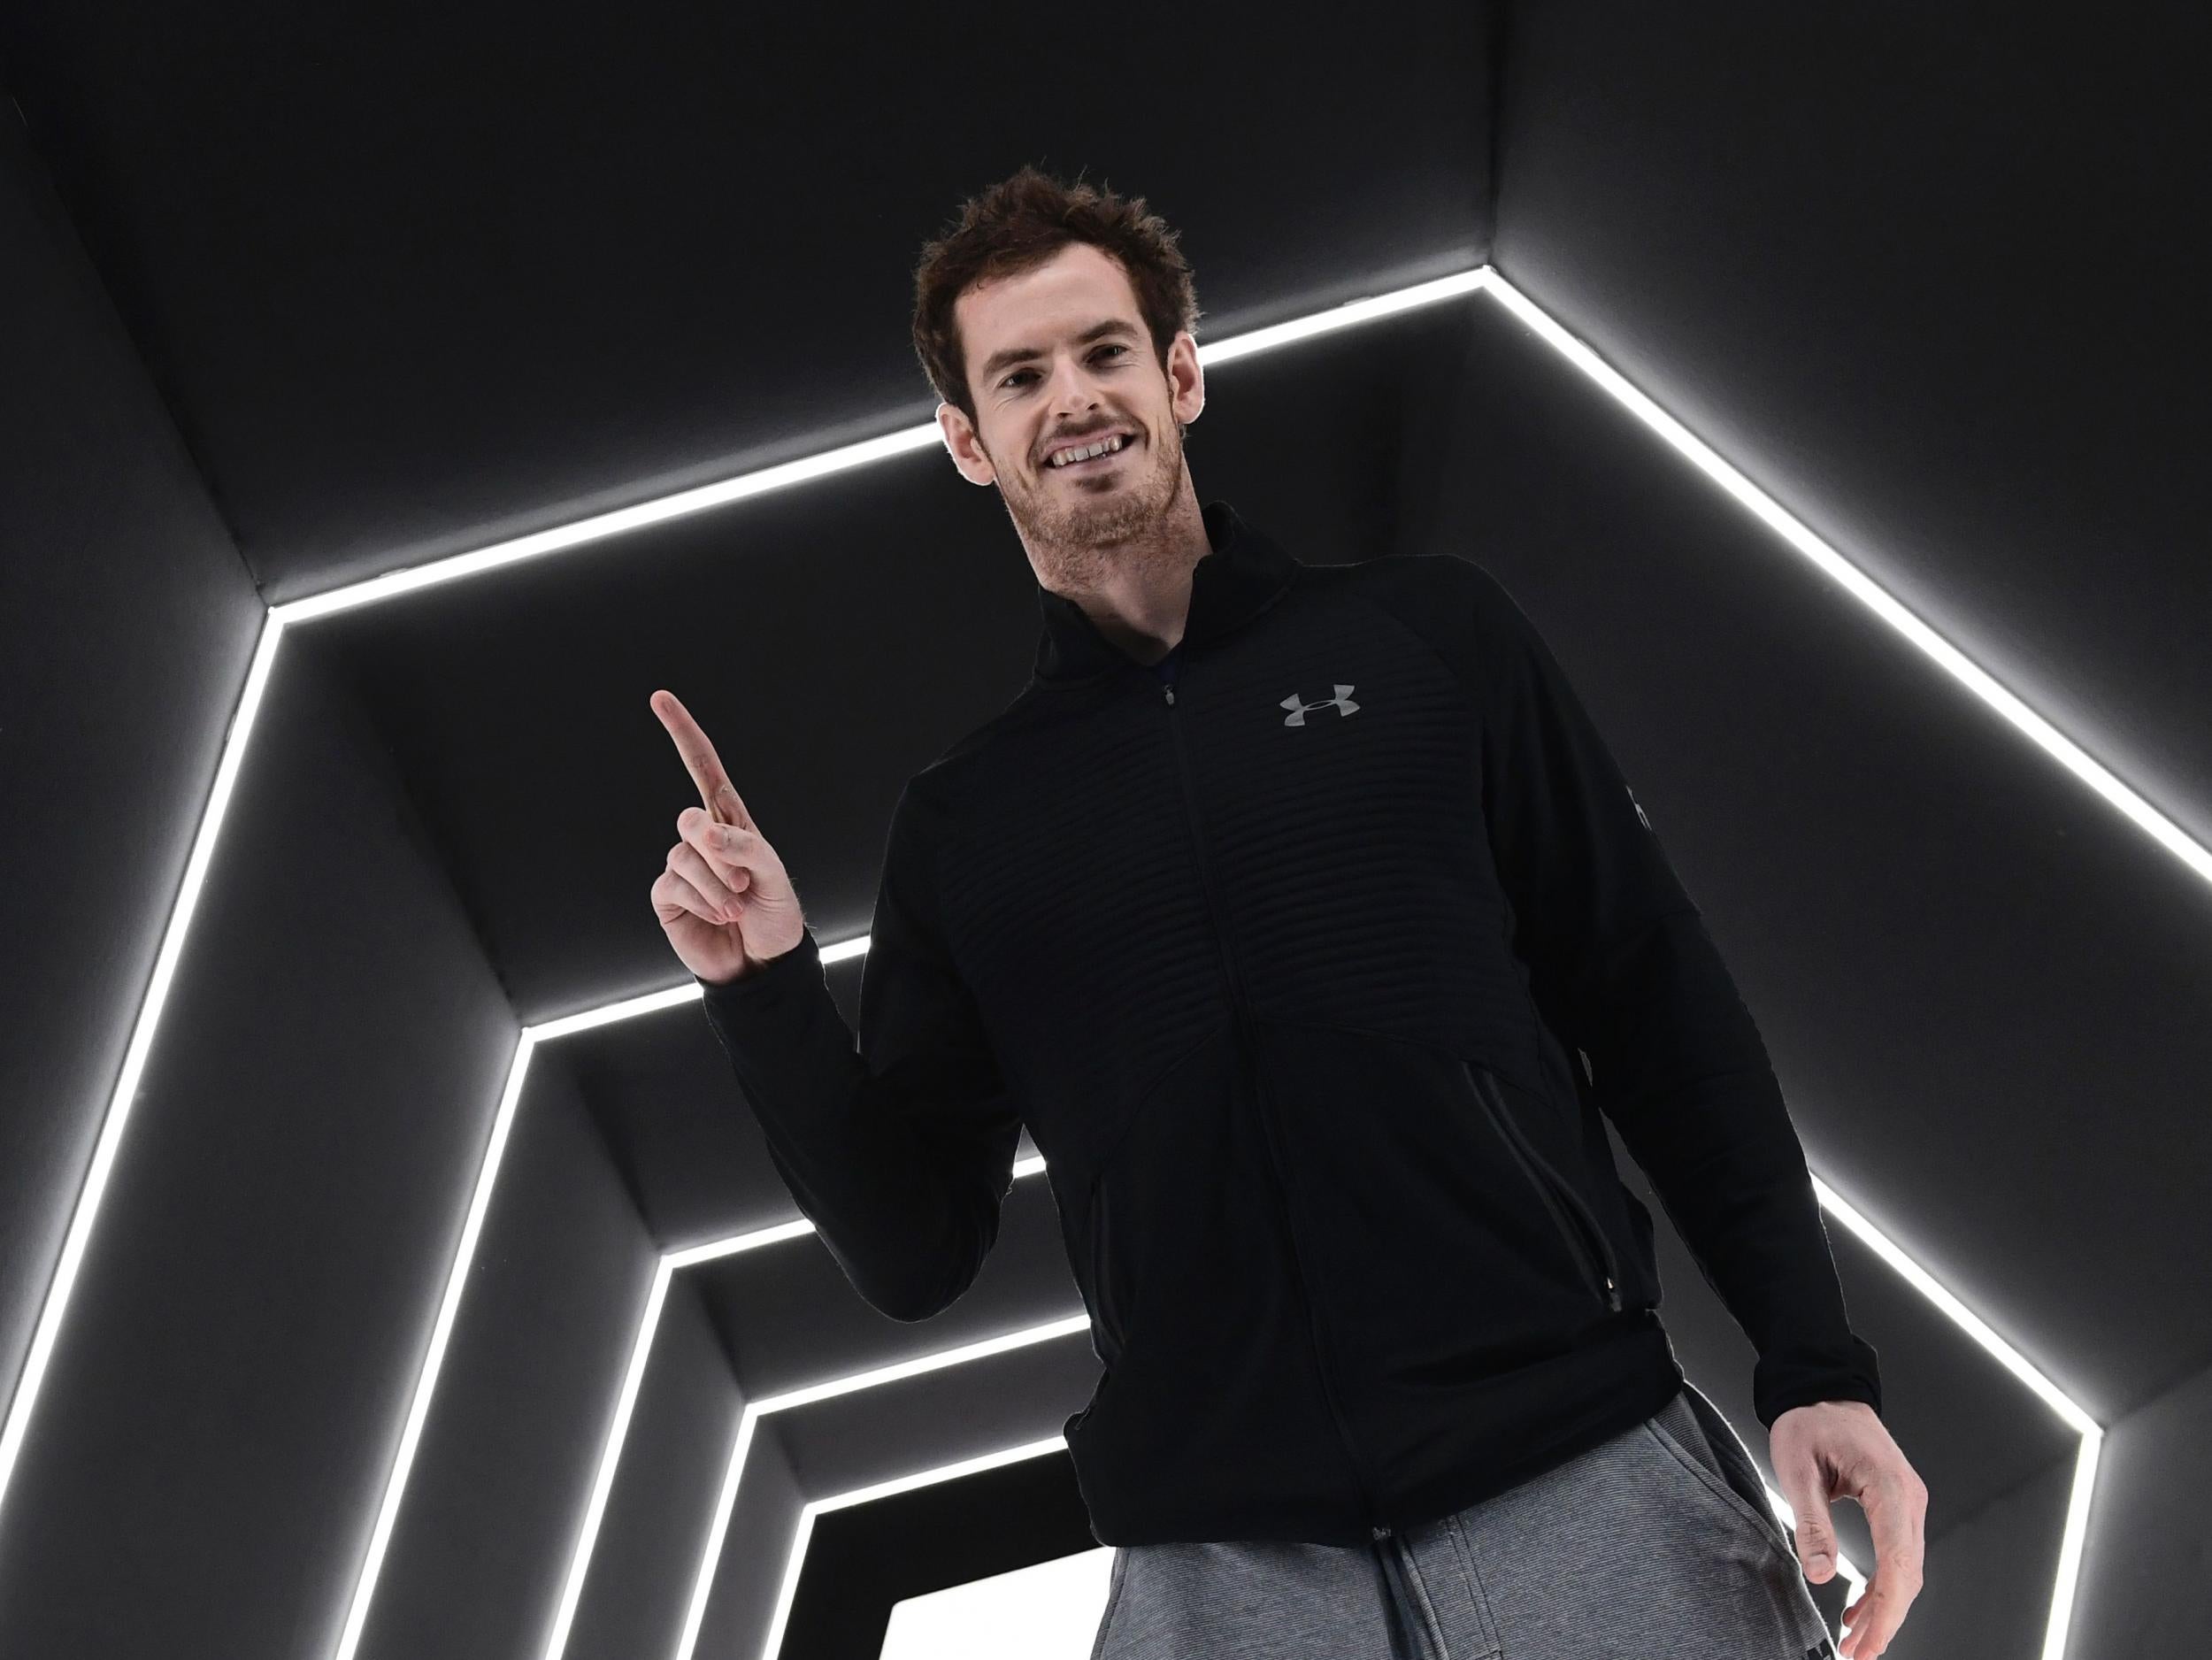 Murray has never reached the final in London